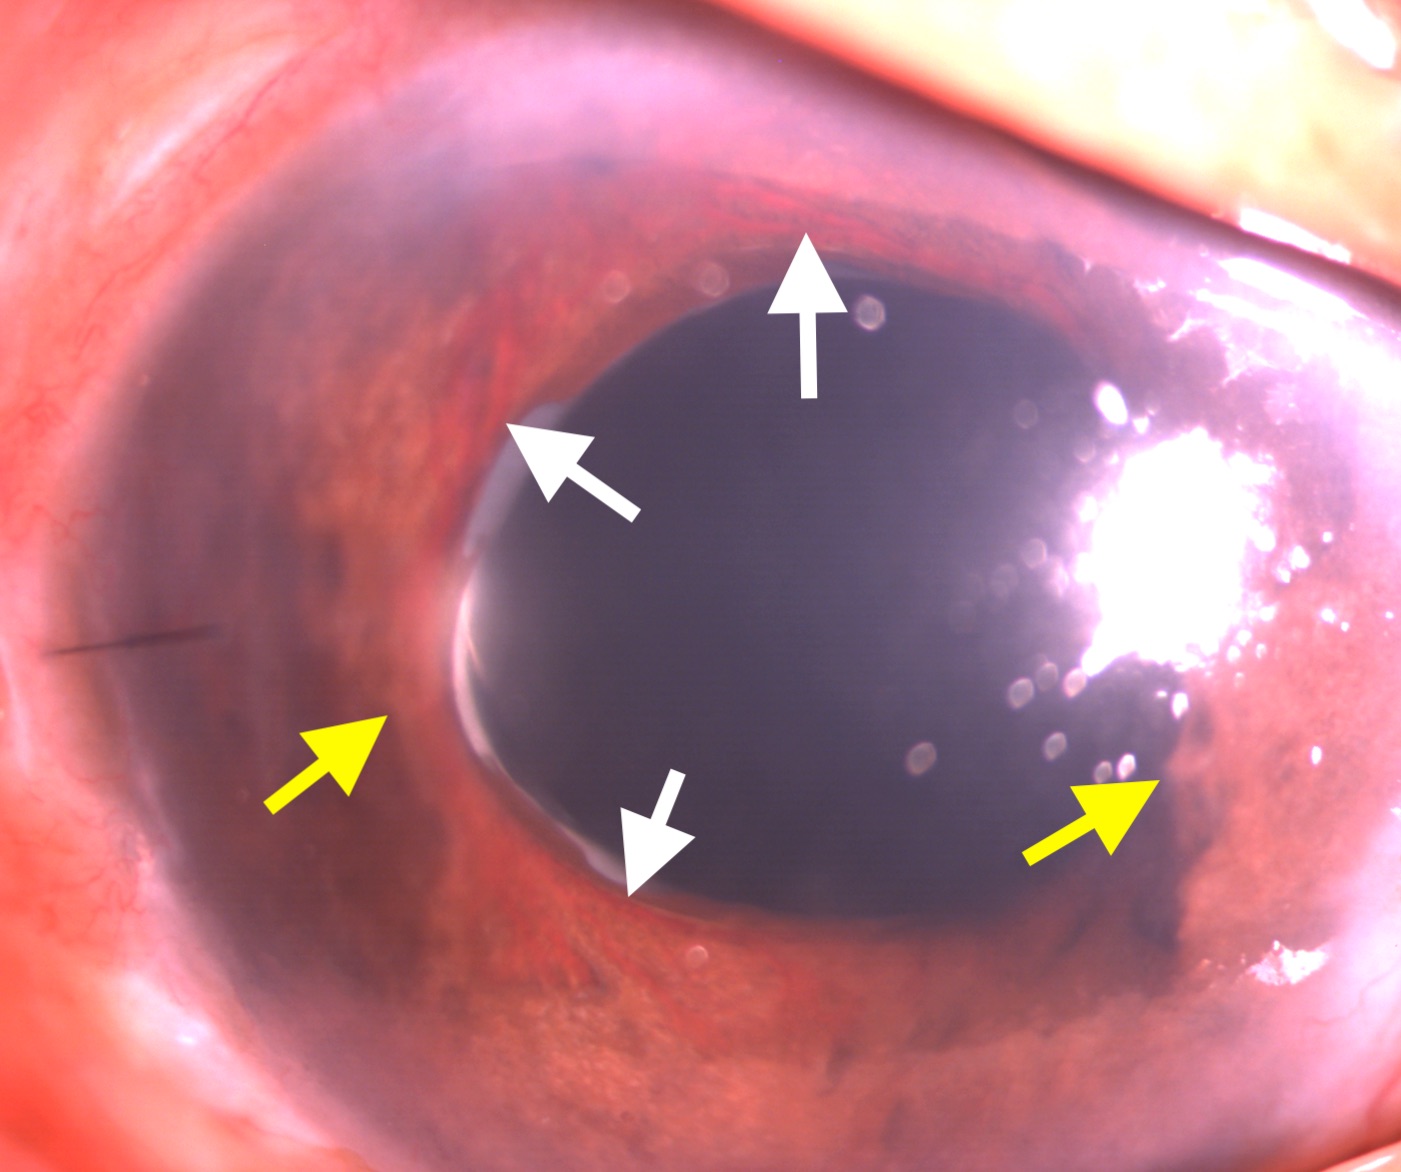 Figure 2- Neovascularization of iris (white arrow marks) and peripheral anterior synechia (yellow arrow marks) in a patient with neovascular glaucoma (NVG)